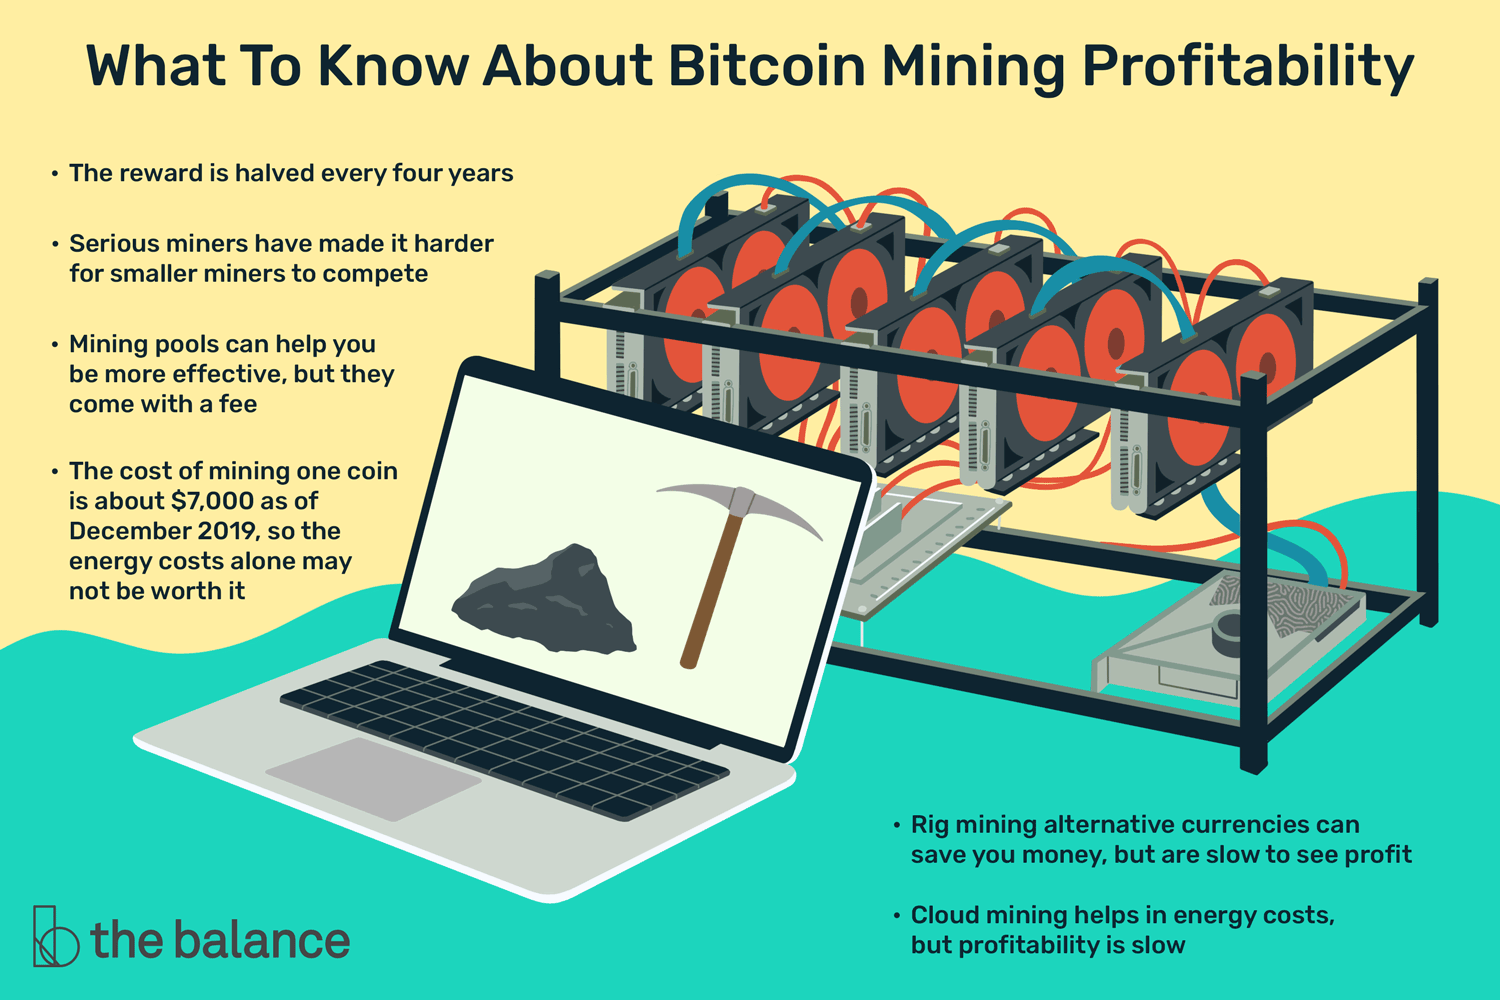 How long does it take to mine 1 Bitcoin?